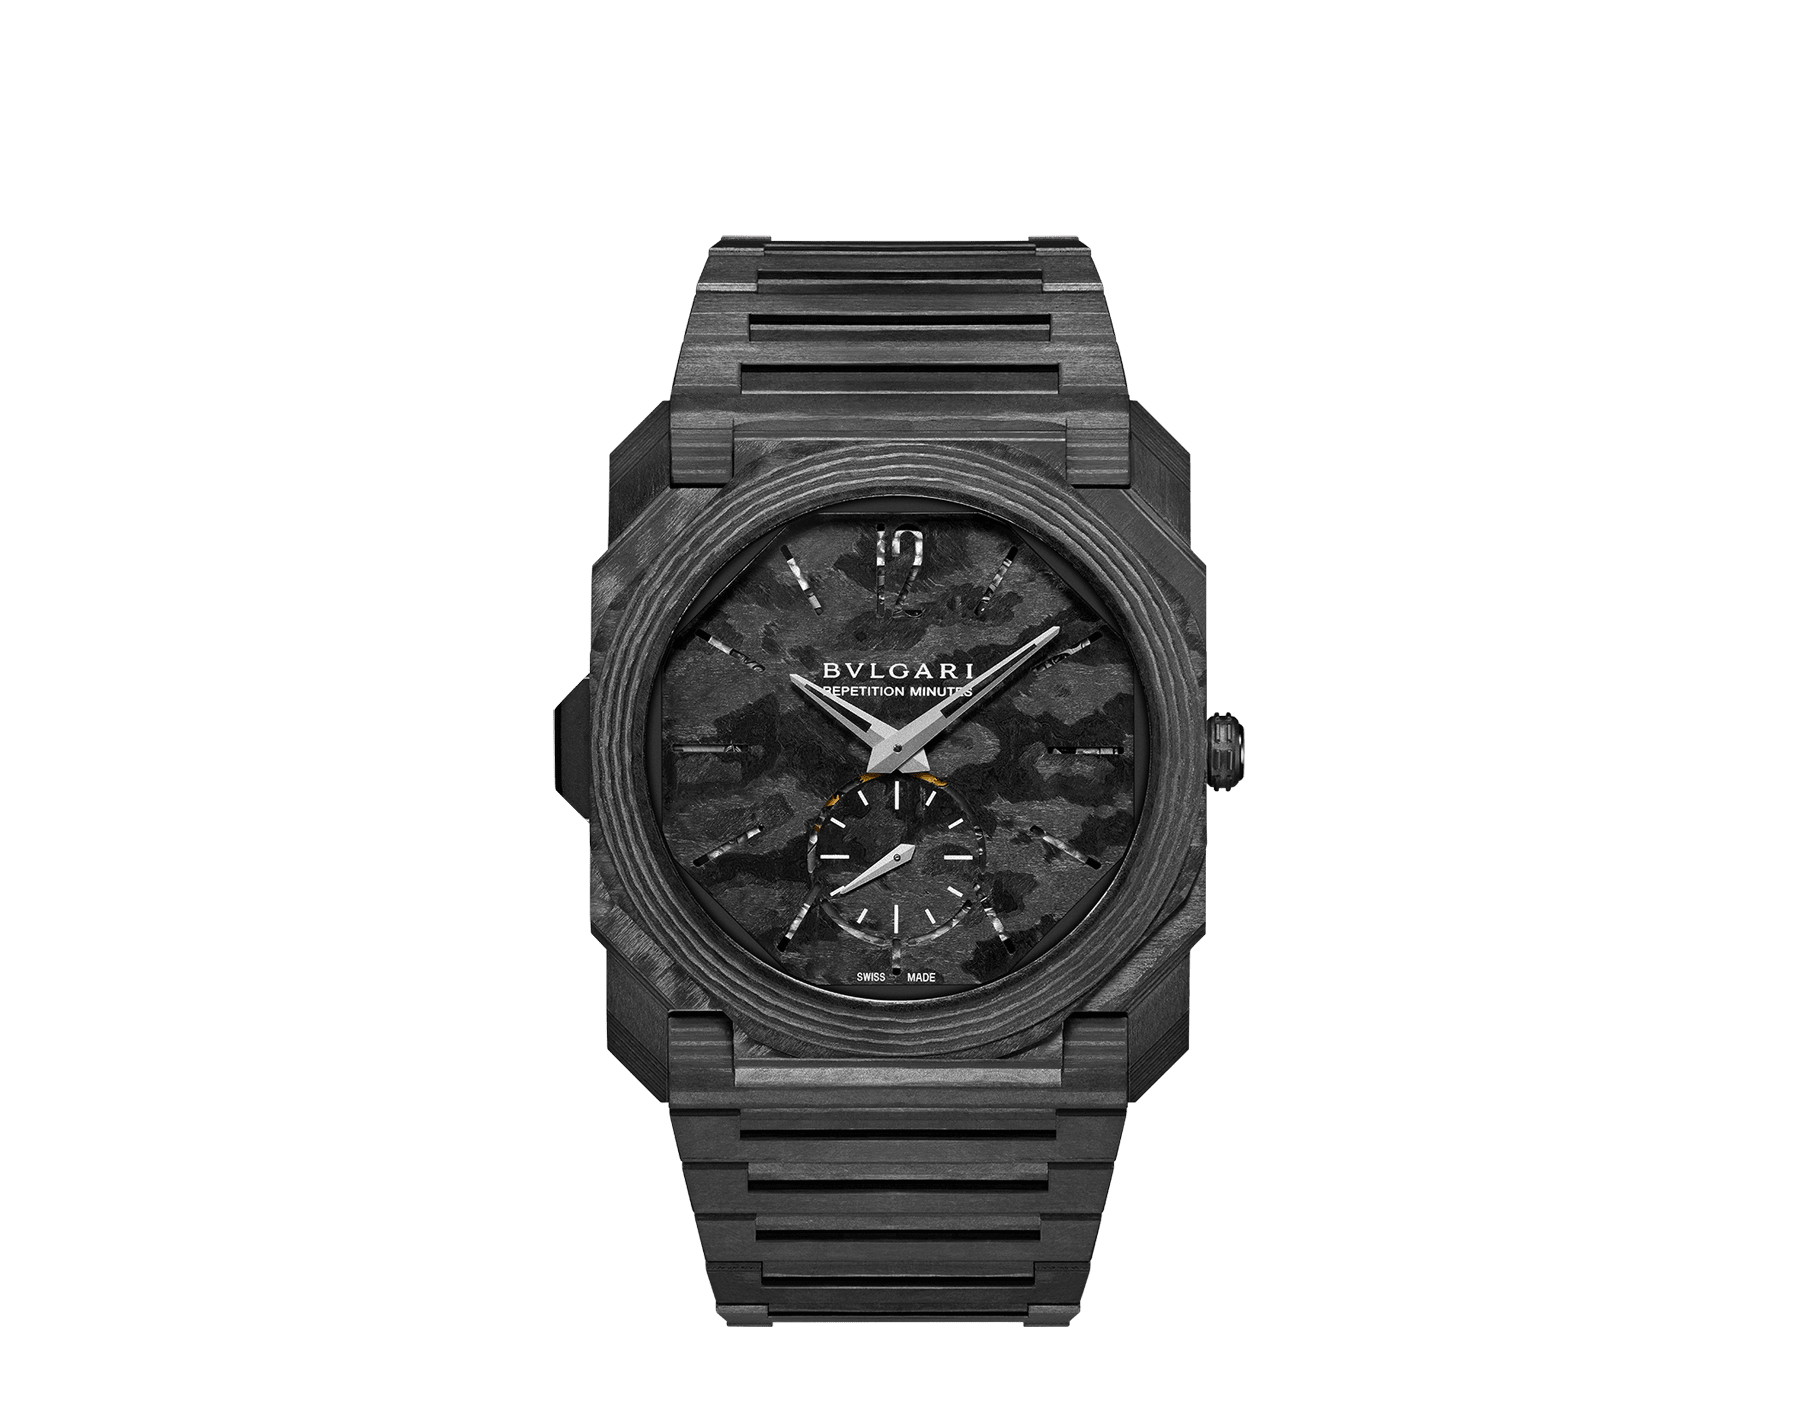 Octo Finissimo Minute Repeater with mechanical manufacture extra-thin movement, manual winding, minute repeater, two hammers and gongs, Carbon CTP and Peek case, bracelet and skeletonized dial. Limited edition of 50 pieces 102794 image 1